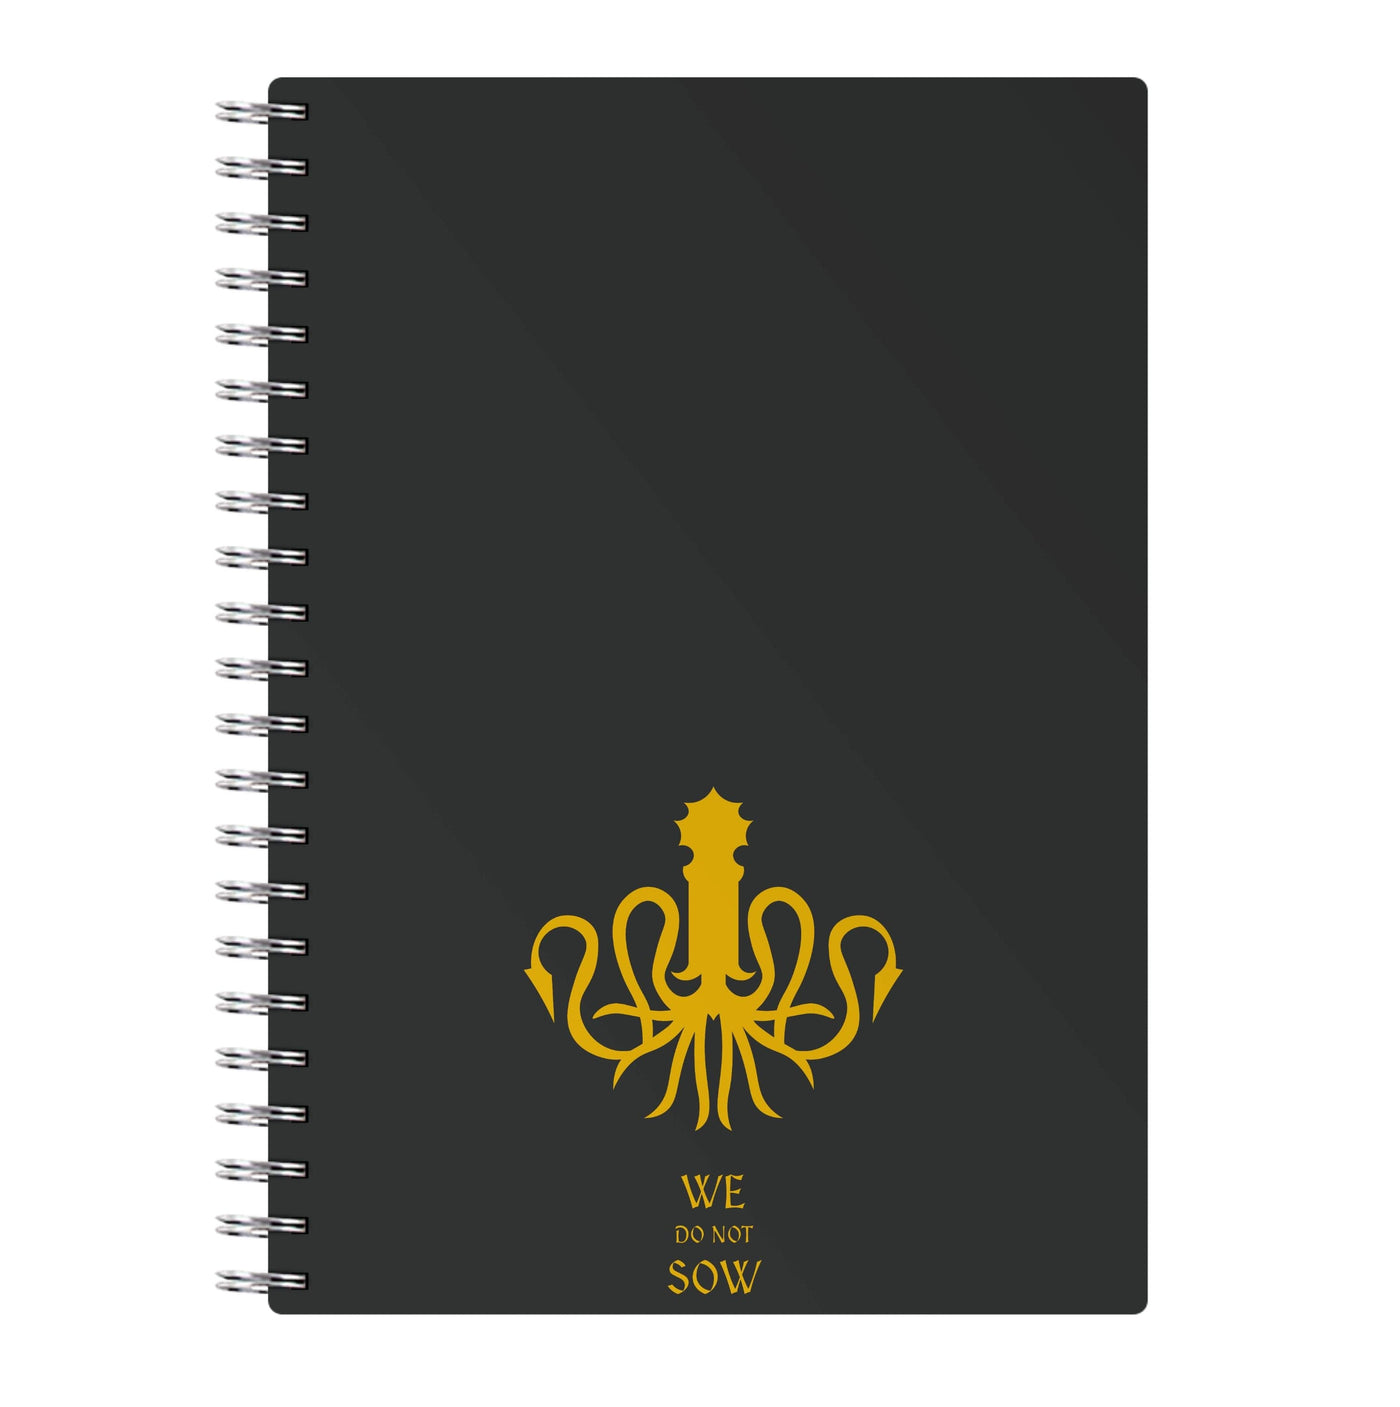 We Do Not Sow - Game Of Thrones Notebook